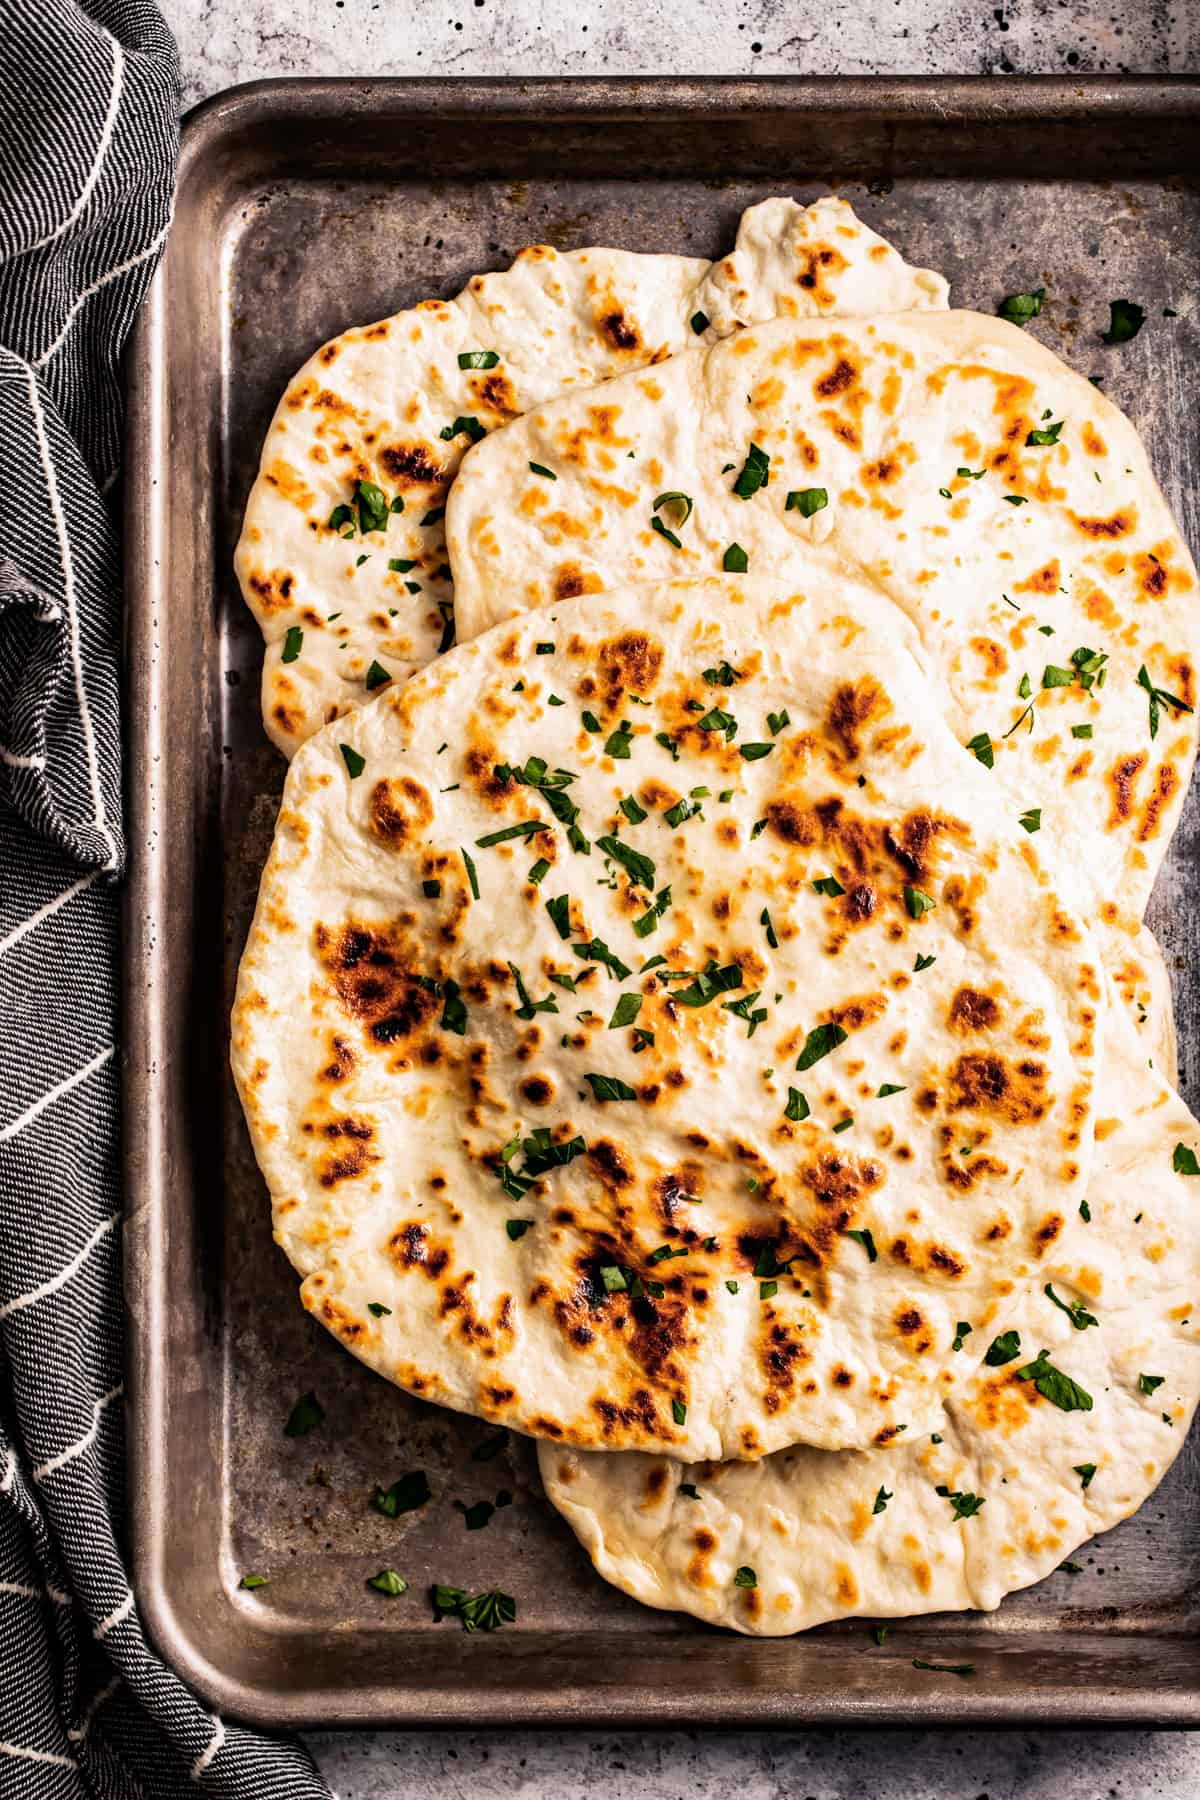 armenian flatbread, also known as lavash, placed on a baking sheet.